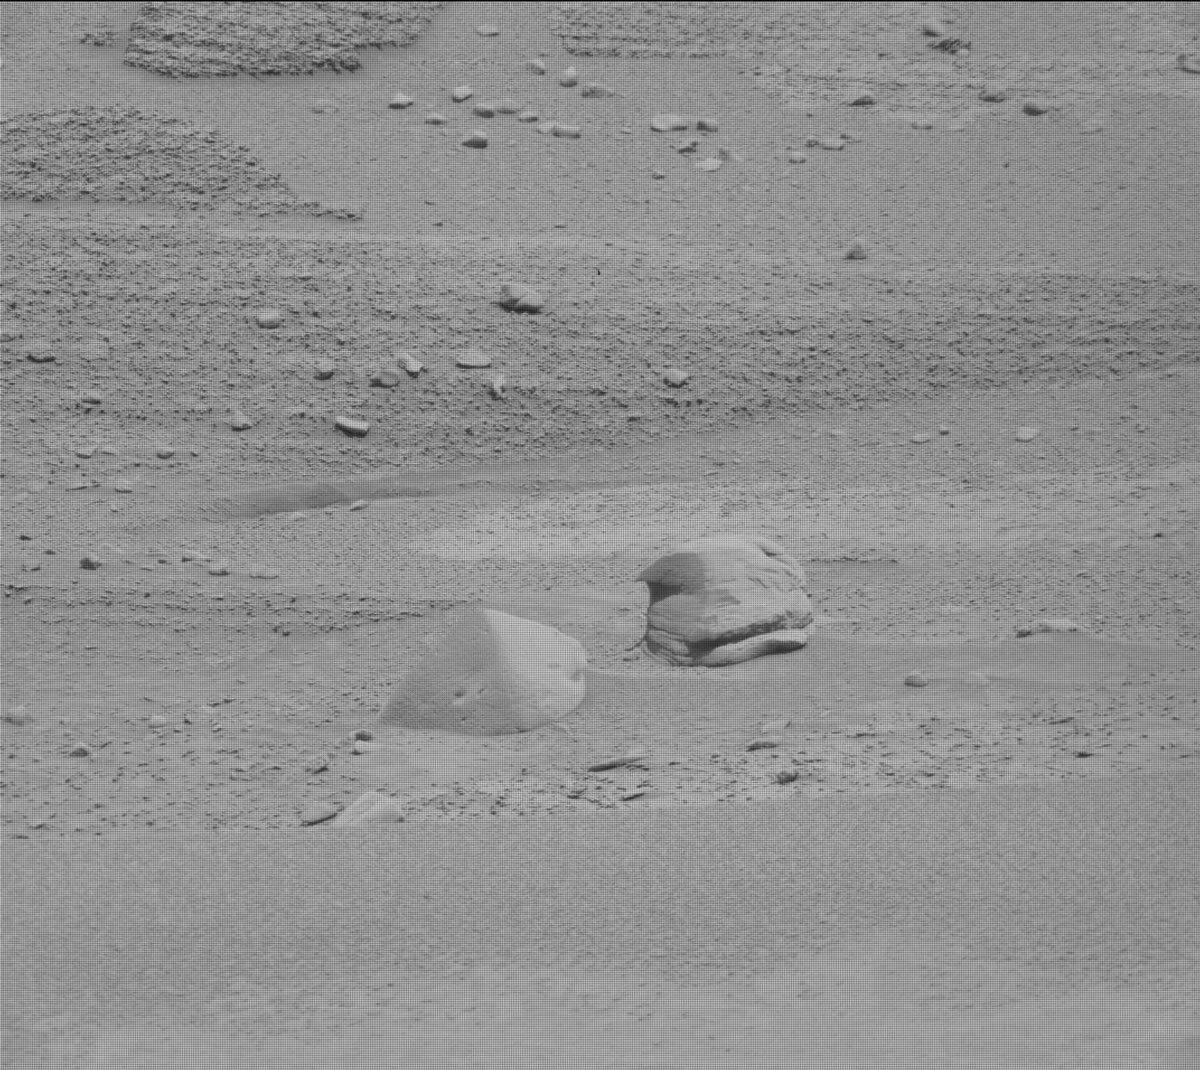 This image was taken by Mast Camera (Mastcam) onboard NASA's Mars rover Curiosity on Sol 3760.